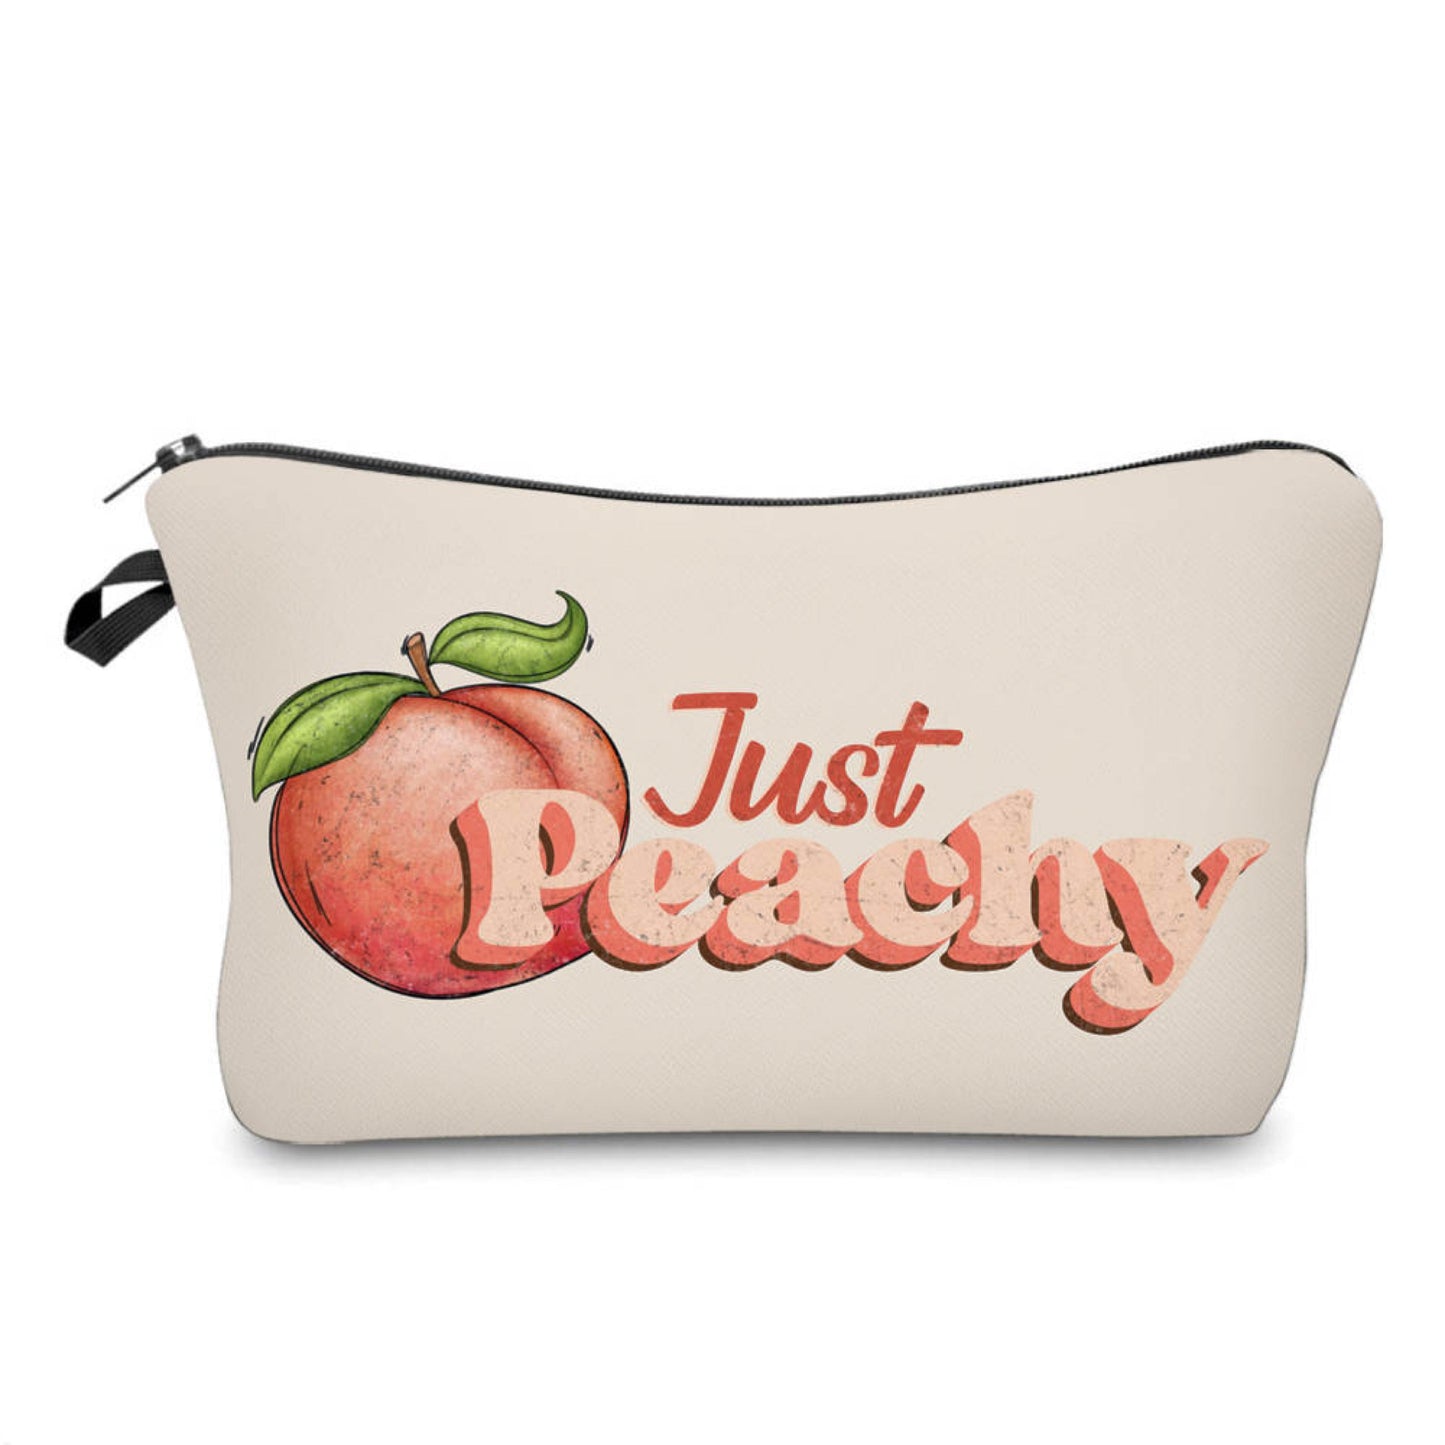 Just Peachy - Water-Resistant Multi-Use Pouch